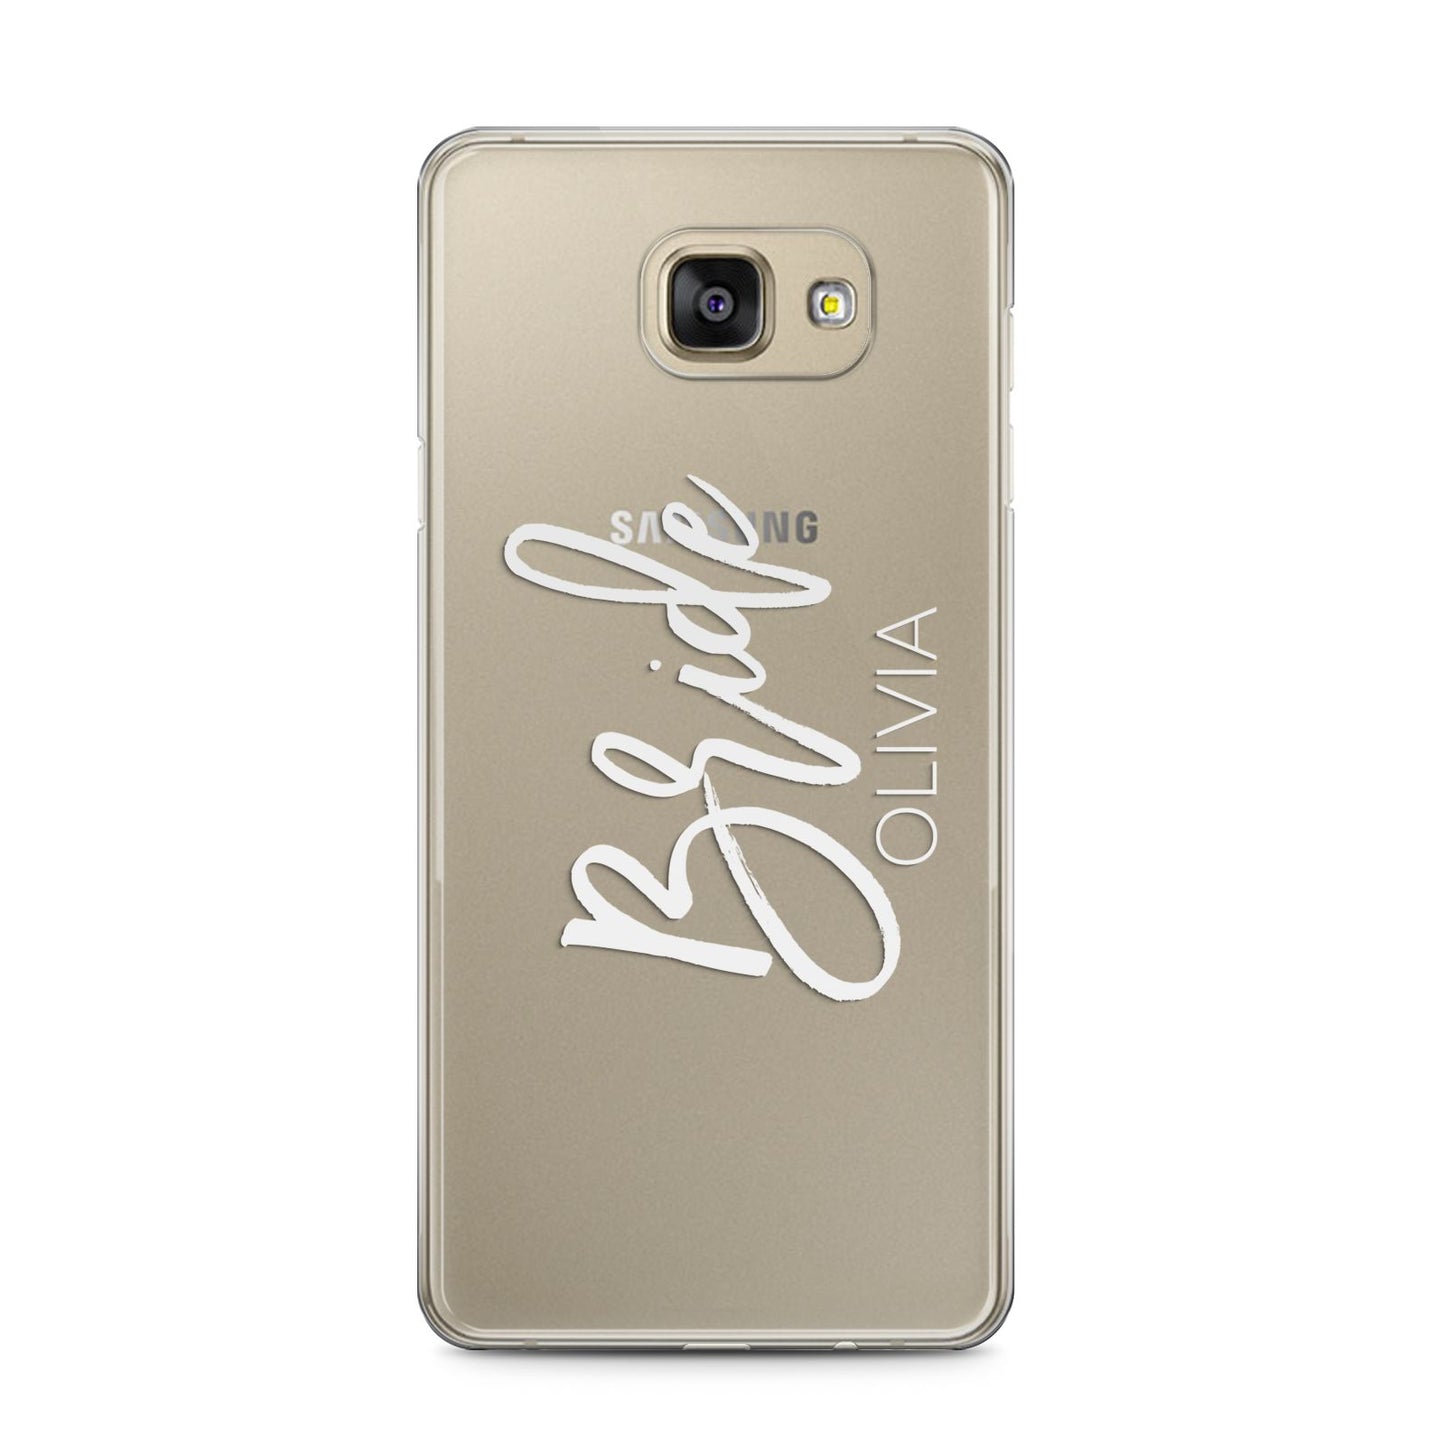 Personalised Bride Samsung Galaxy A5 2016 Case on gold phone